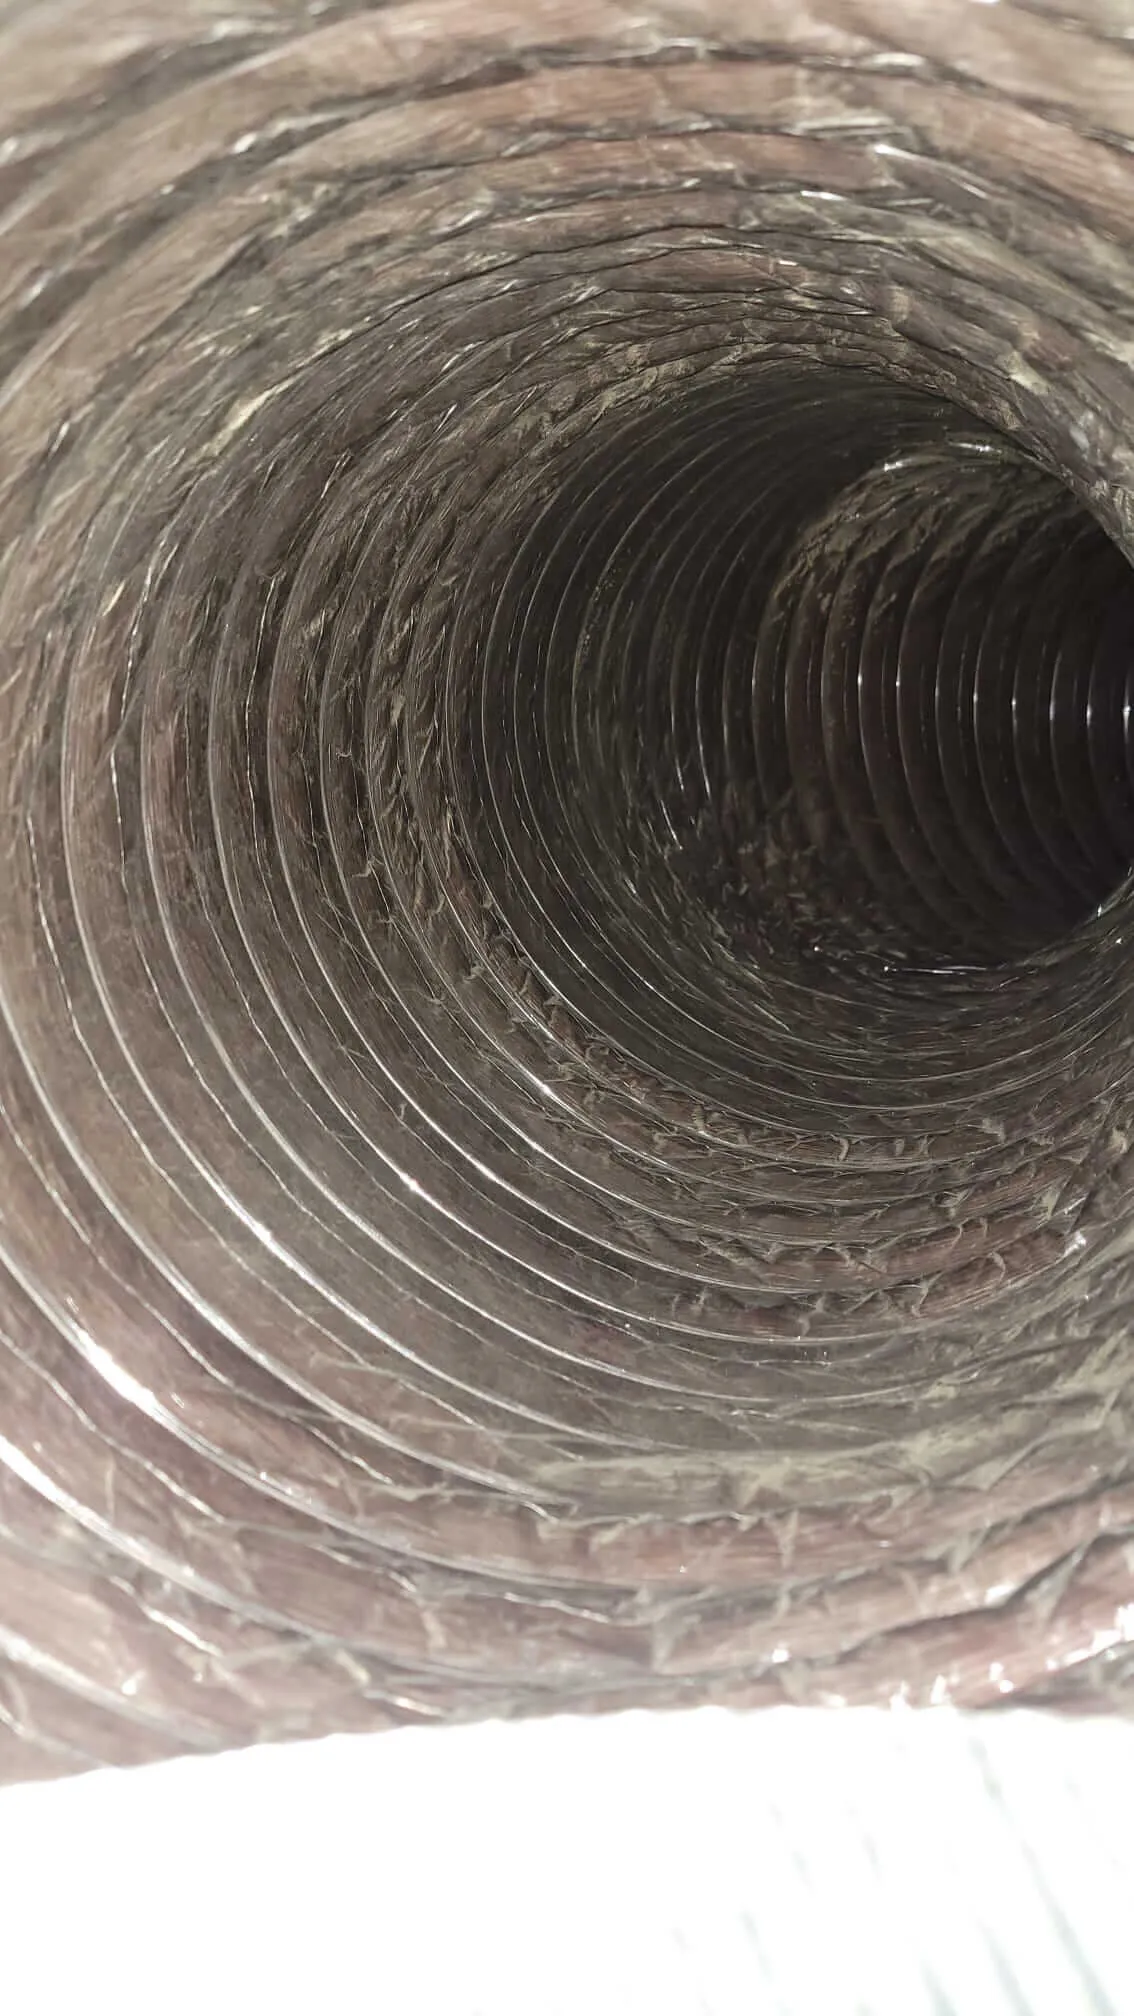 A dirty air duct that needs cleaning